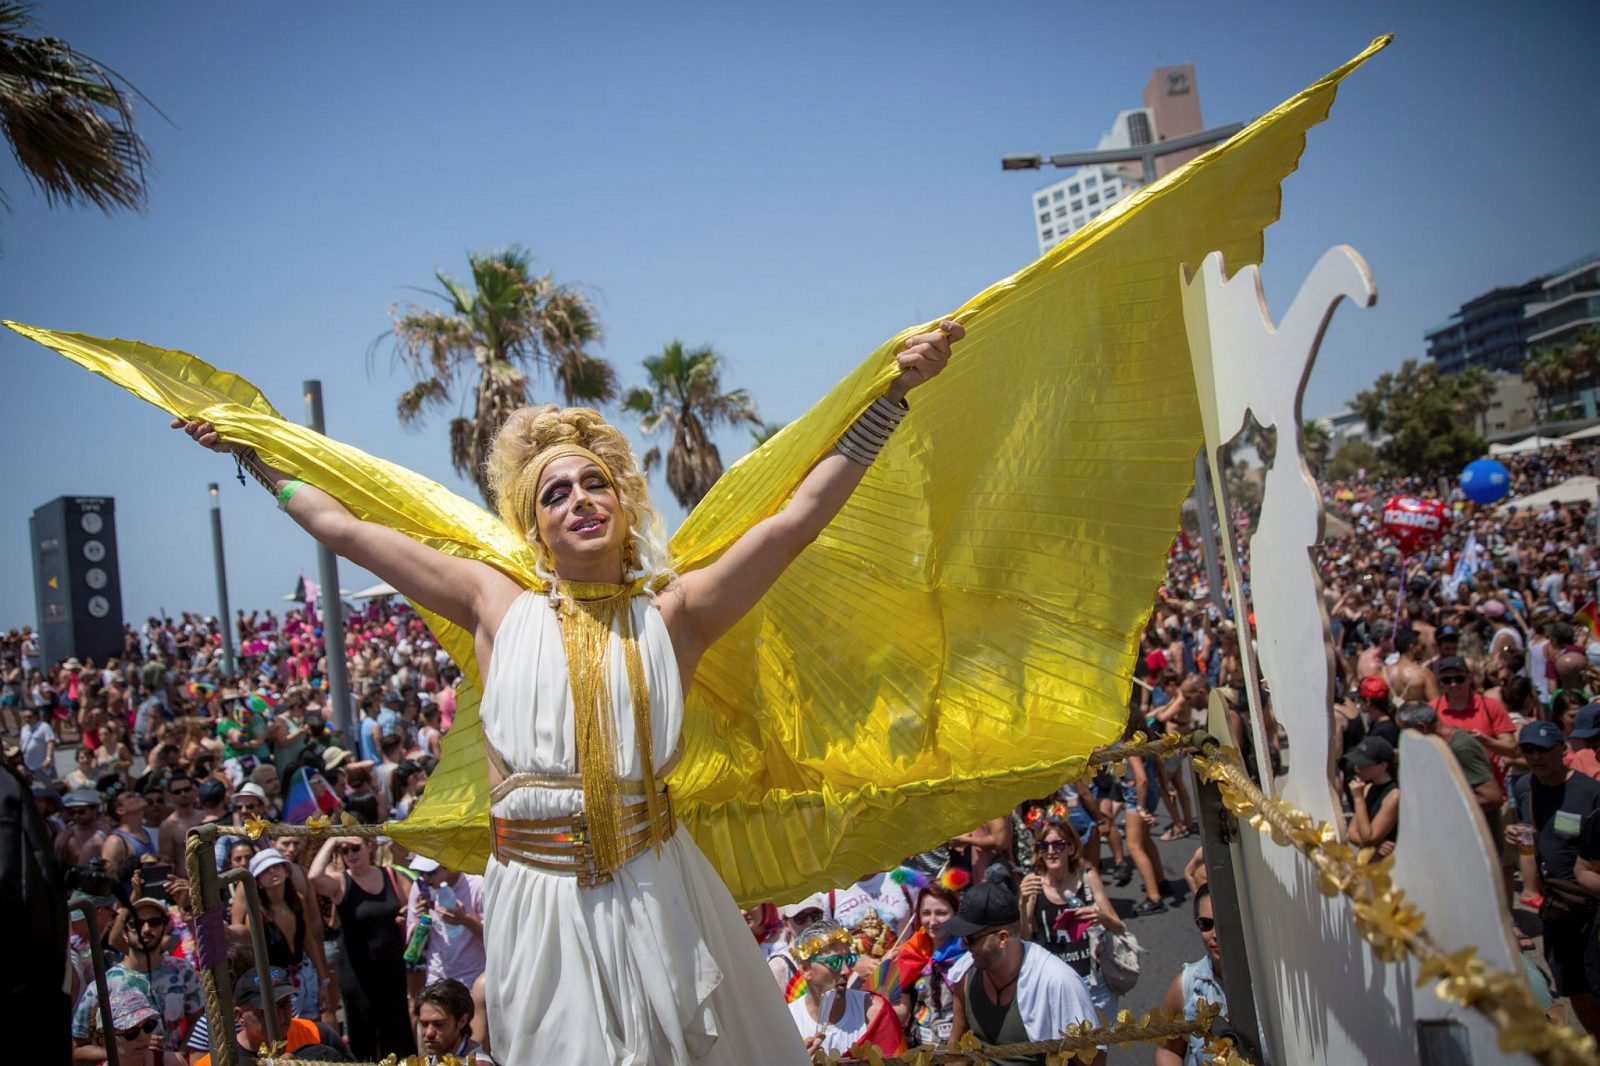 A drag queen takes part in the annual Pride Parade in Tel Aviv, June 8, 2018. Photo by Miriam Alster/FLASH90